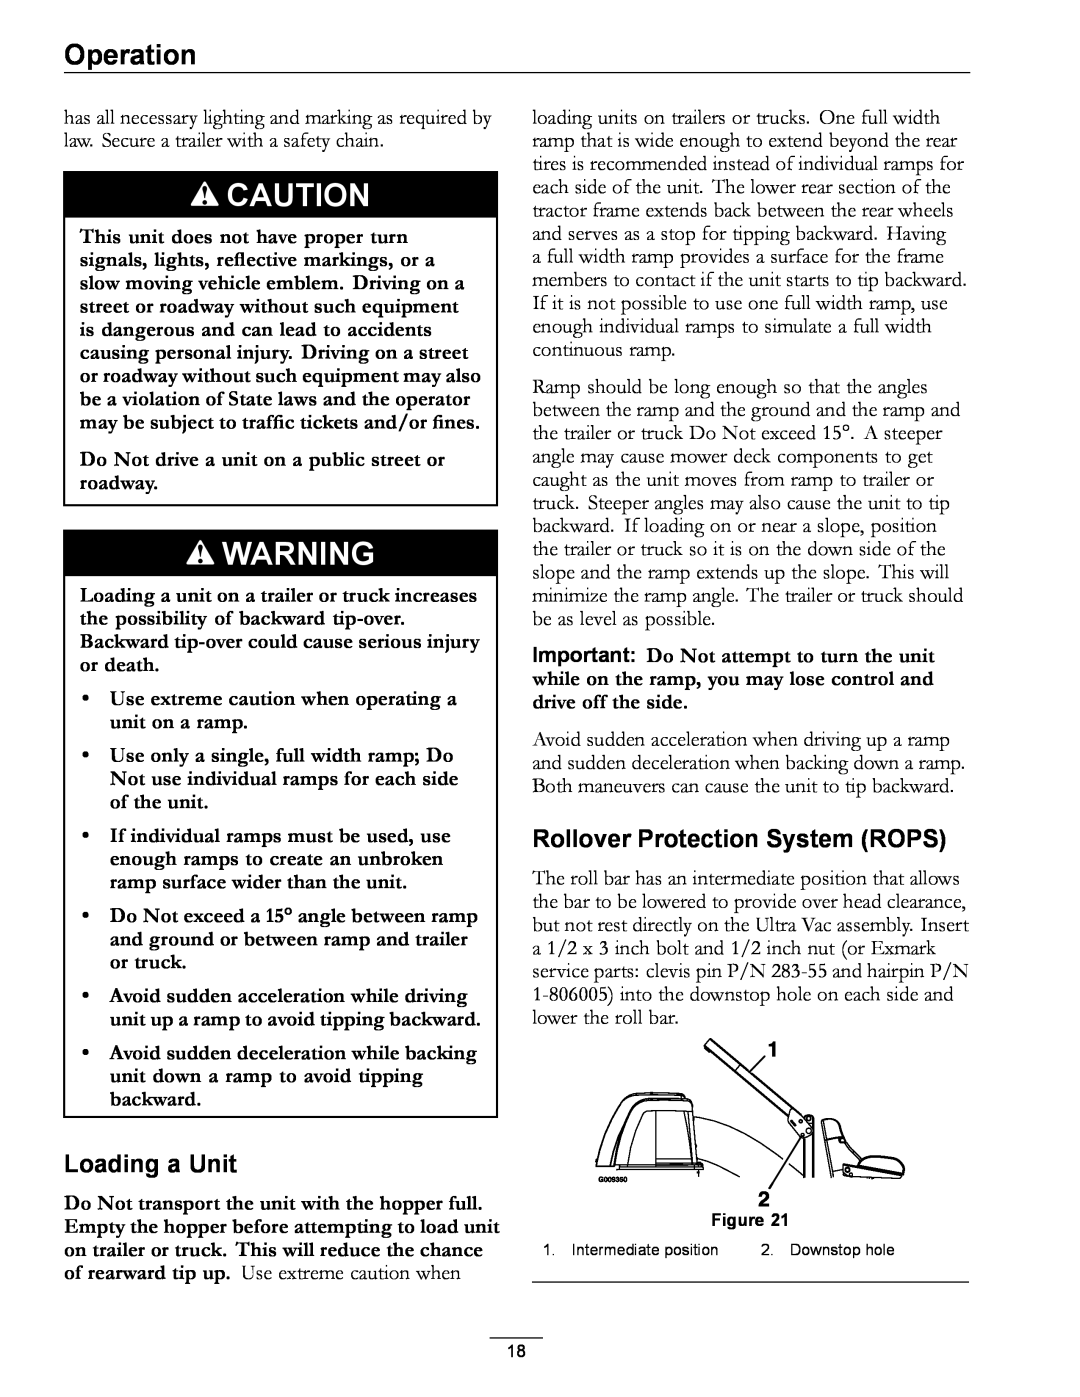 Exmark LAZER AS manual Loading a Unit, Rollover Protection System ROPS, Do Not drive a unit on a public street or roadway 